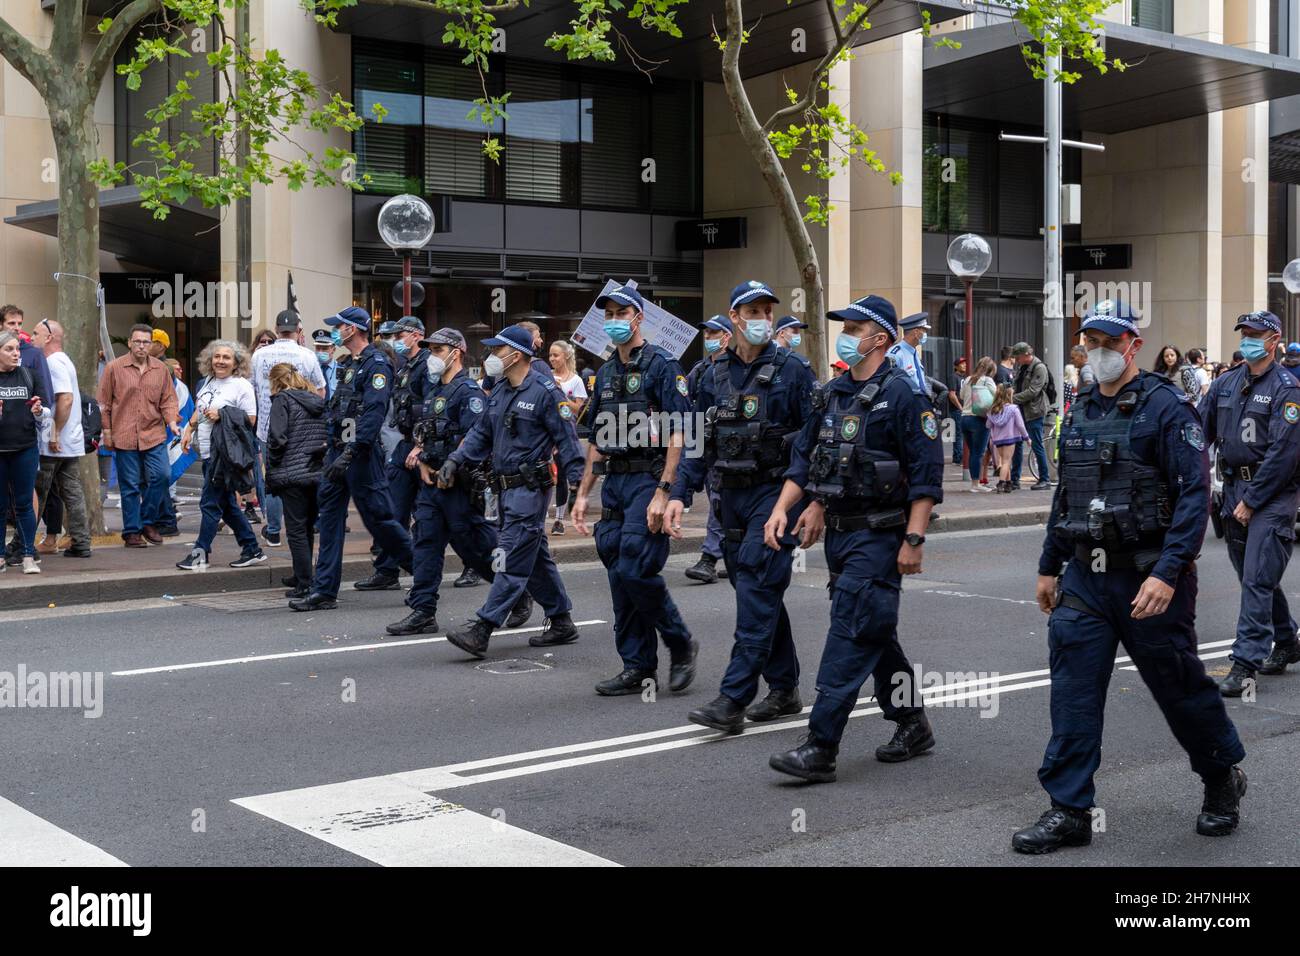 Several policemen and policewomen can be seen walking on the street in Sydney, Australia. part of the freedom rally protest against vaccine mandates. Stock Photo